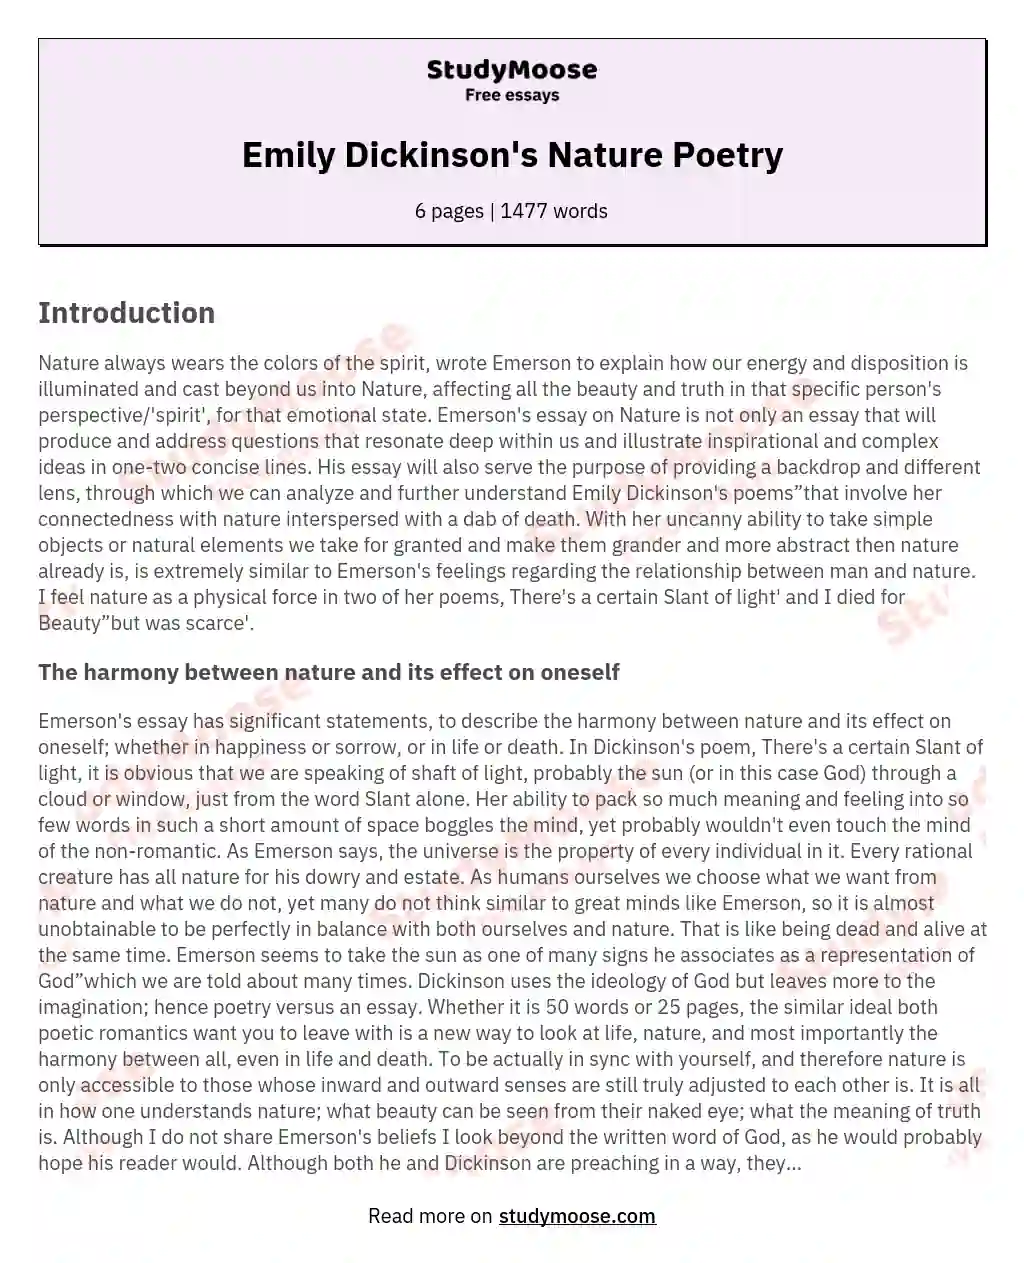 Emily Dickinson's Nature Poetry